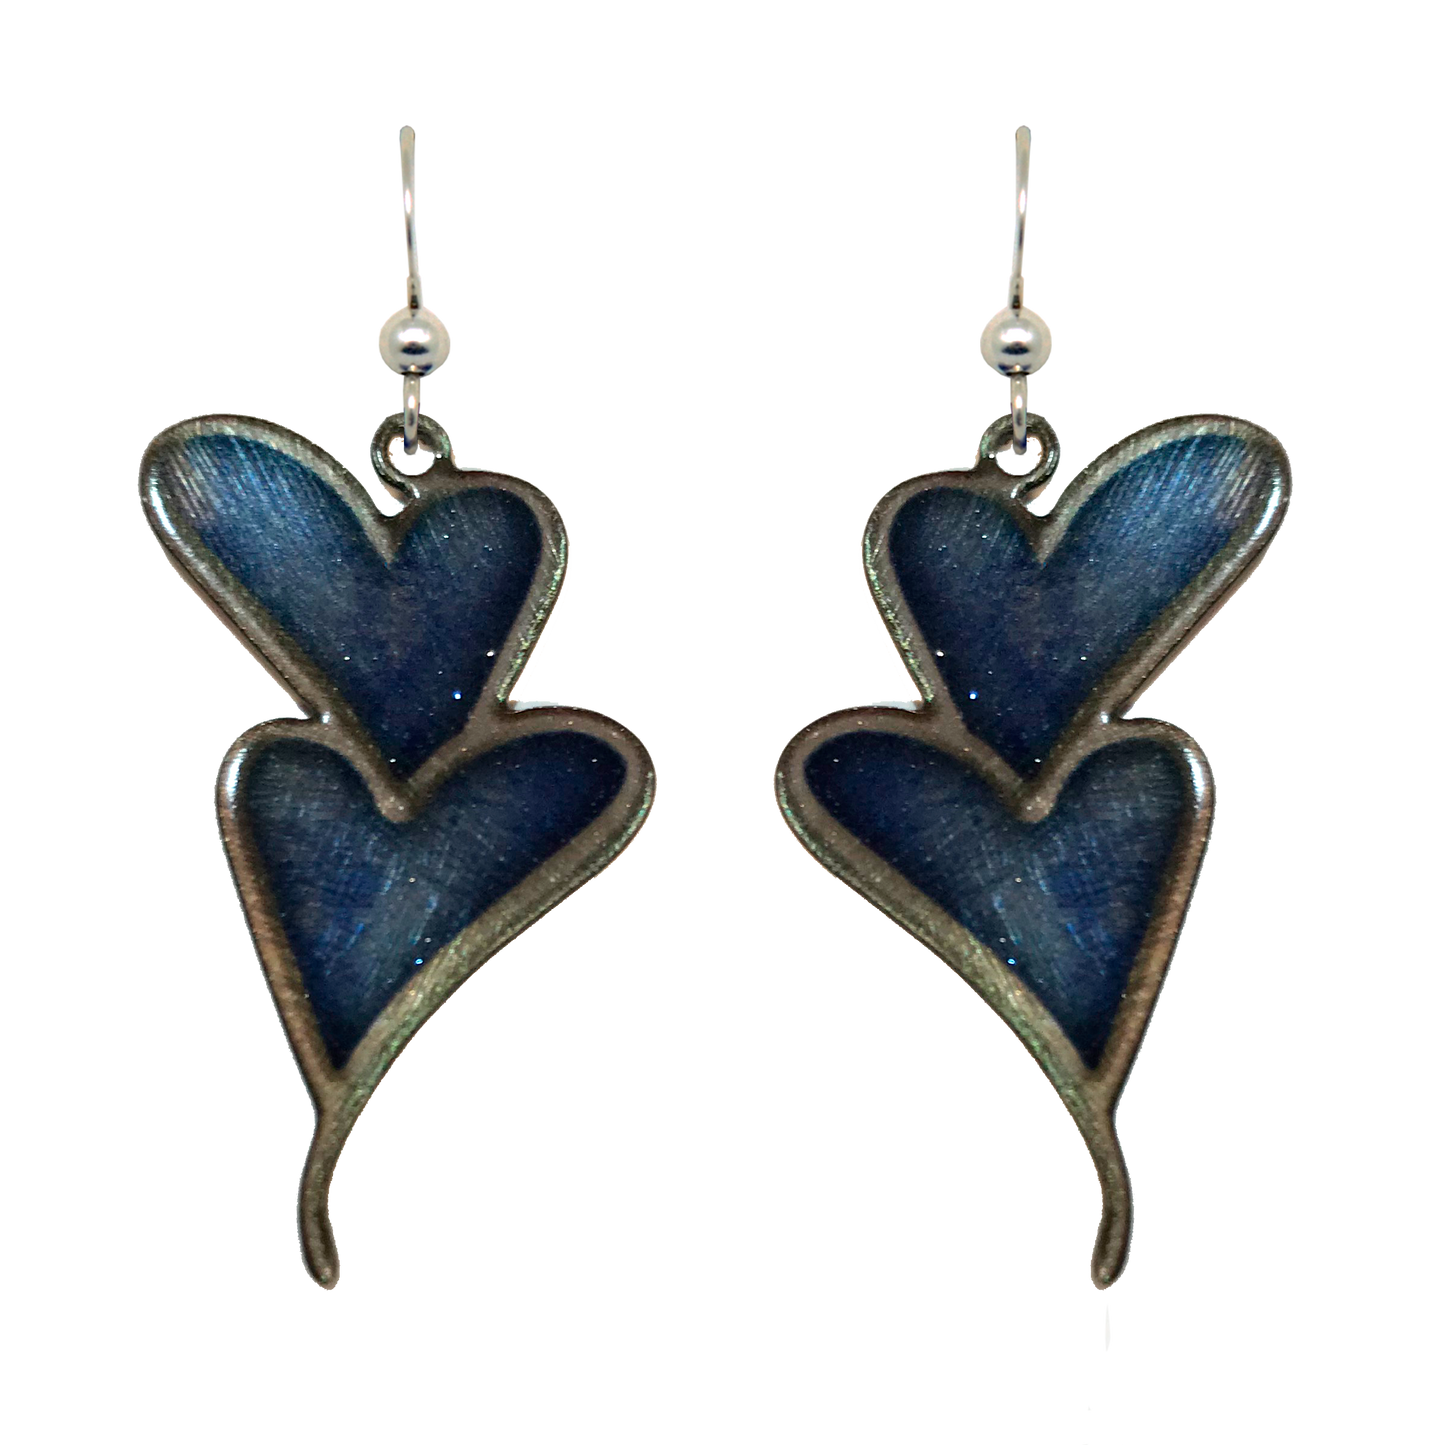 Double Blue Hearts, Stainless Steel, Sterling Silver Earwires, #2533